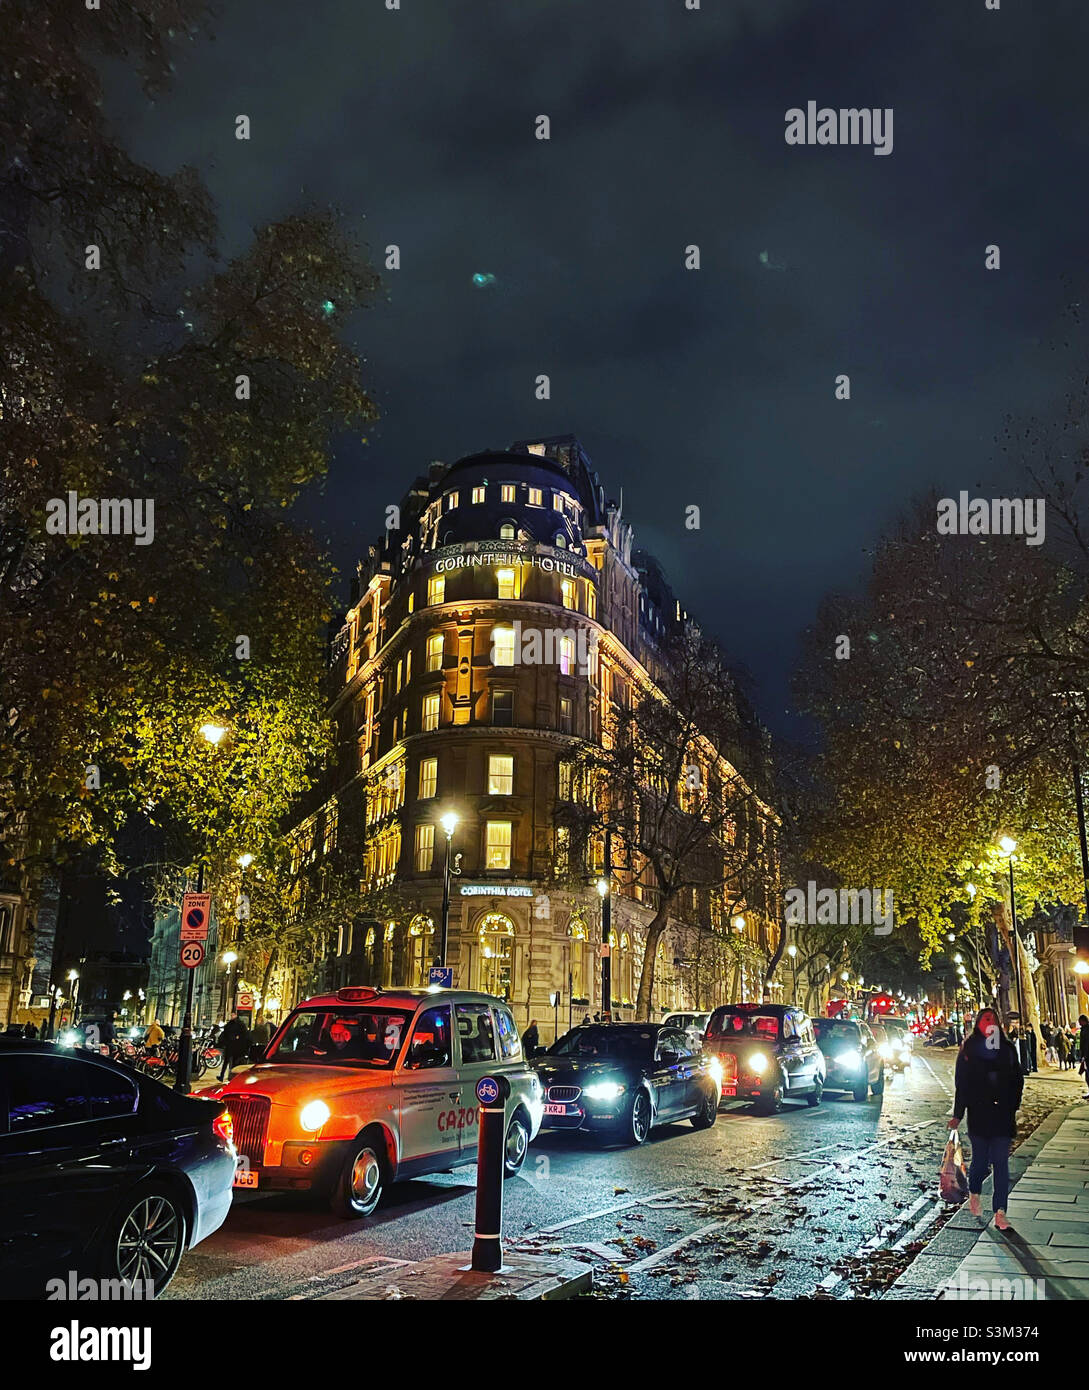 Evening view of the corinthia hotel in london Stock Photo